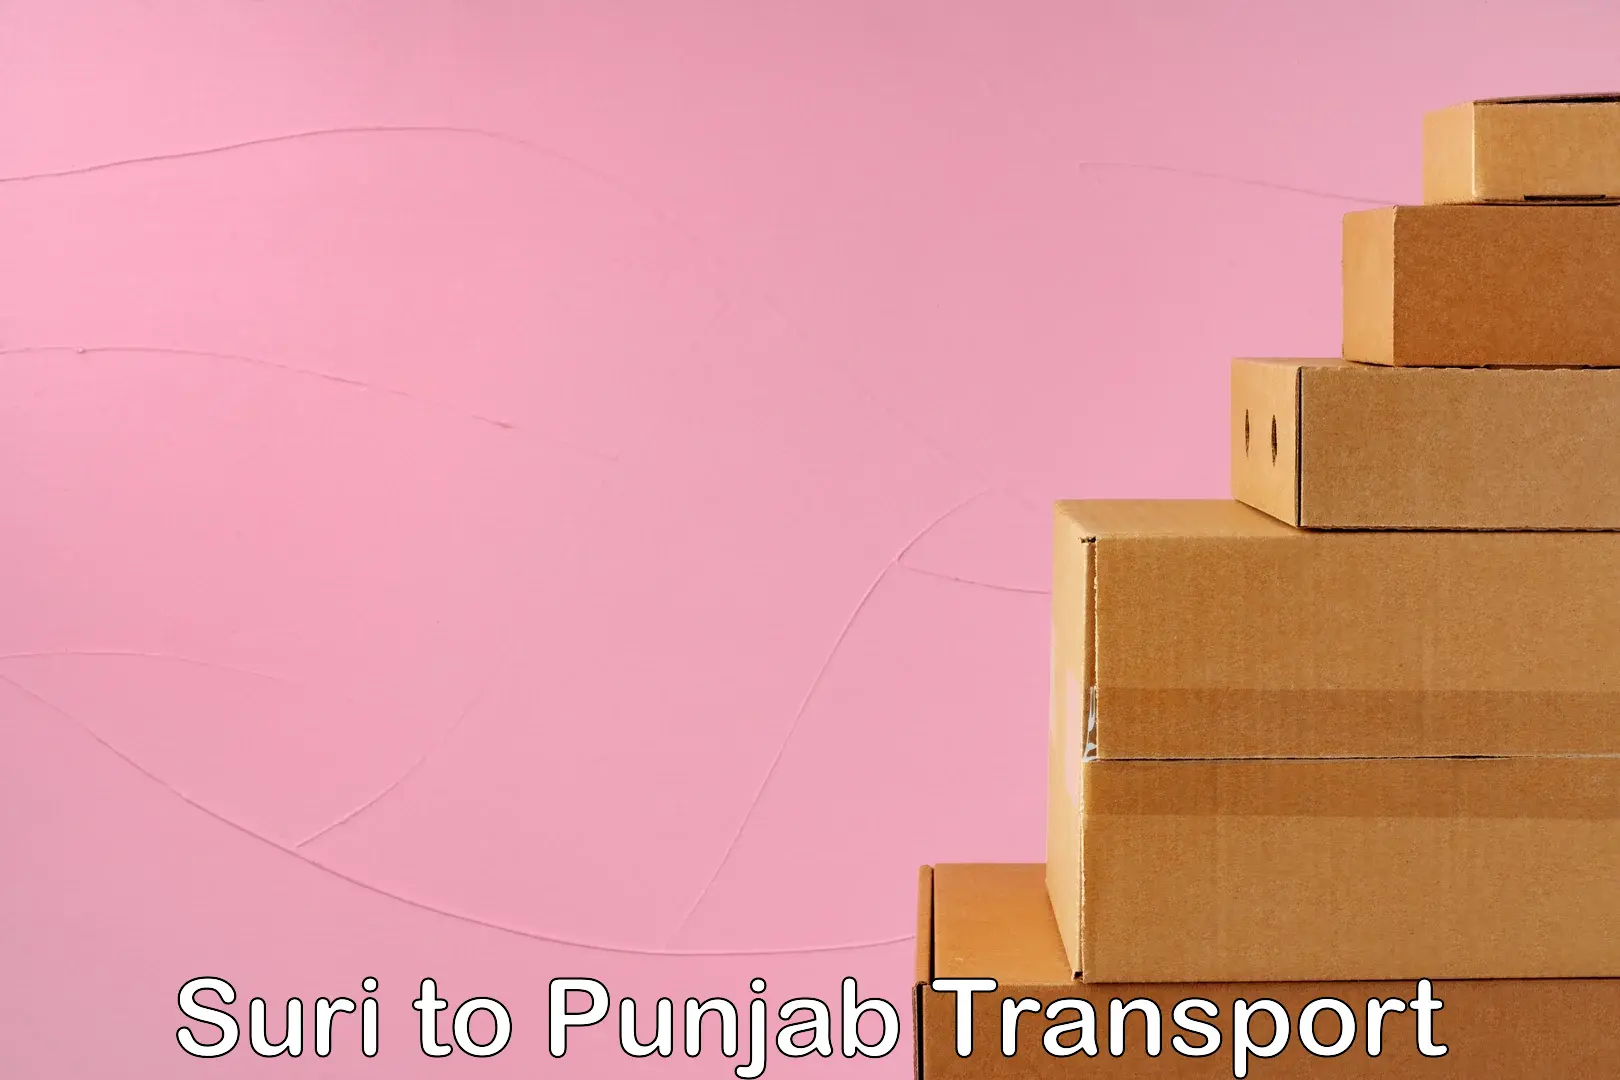 Container transport service Suri to Jalalabad